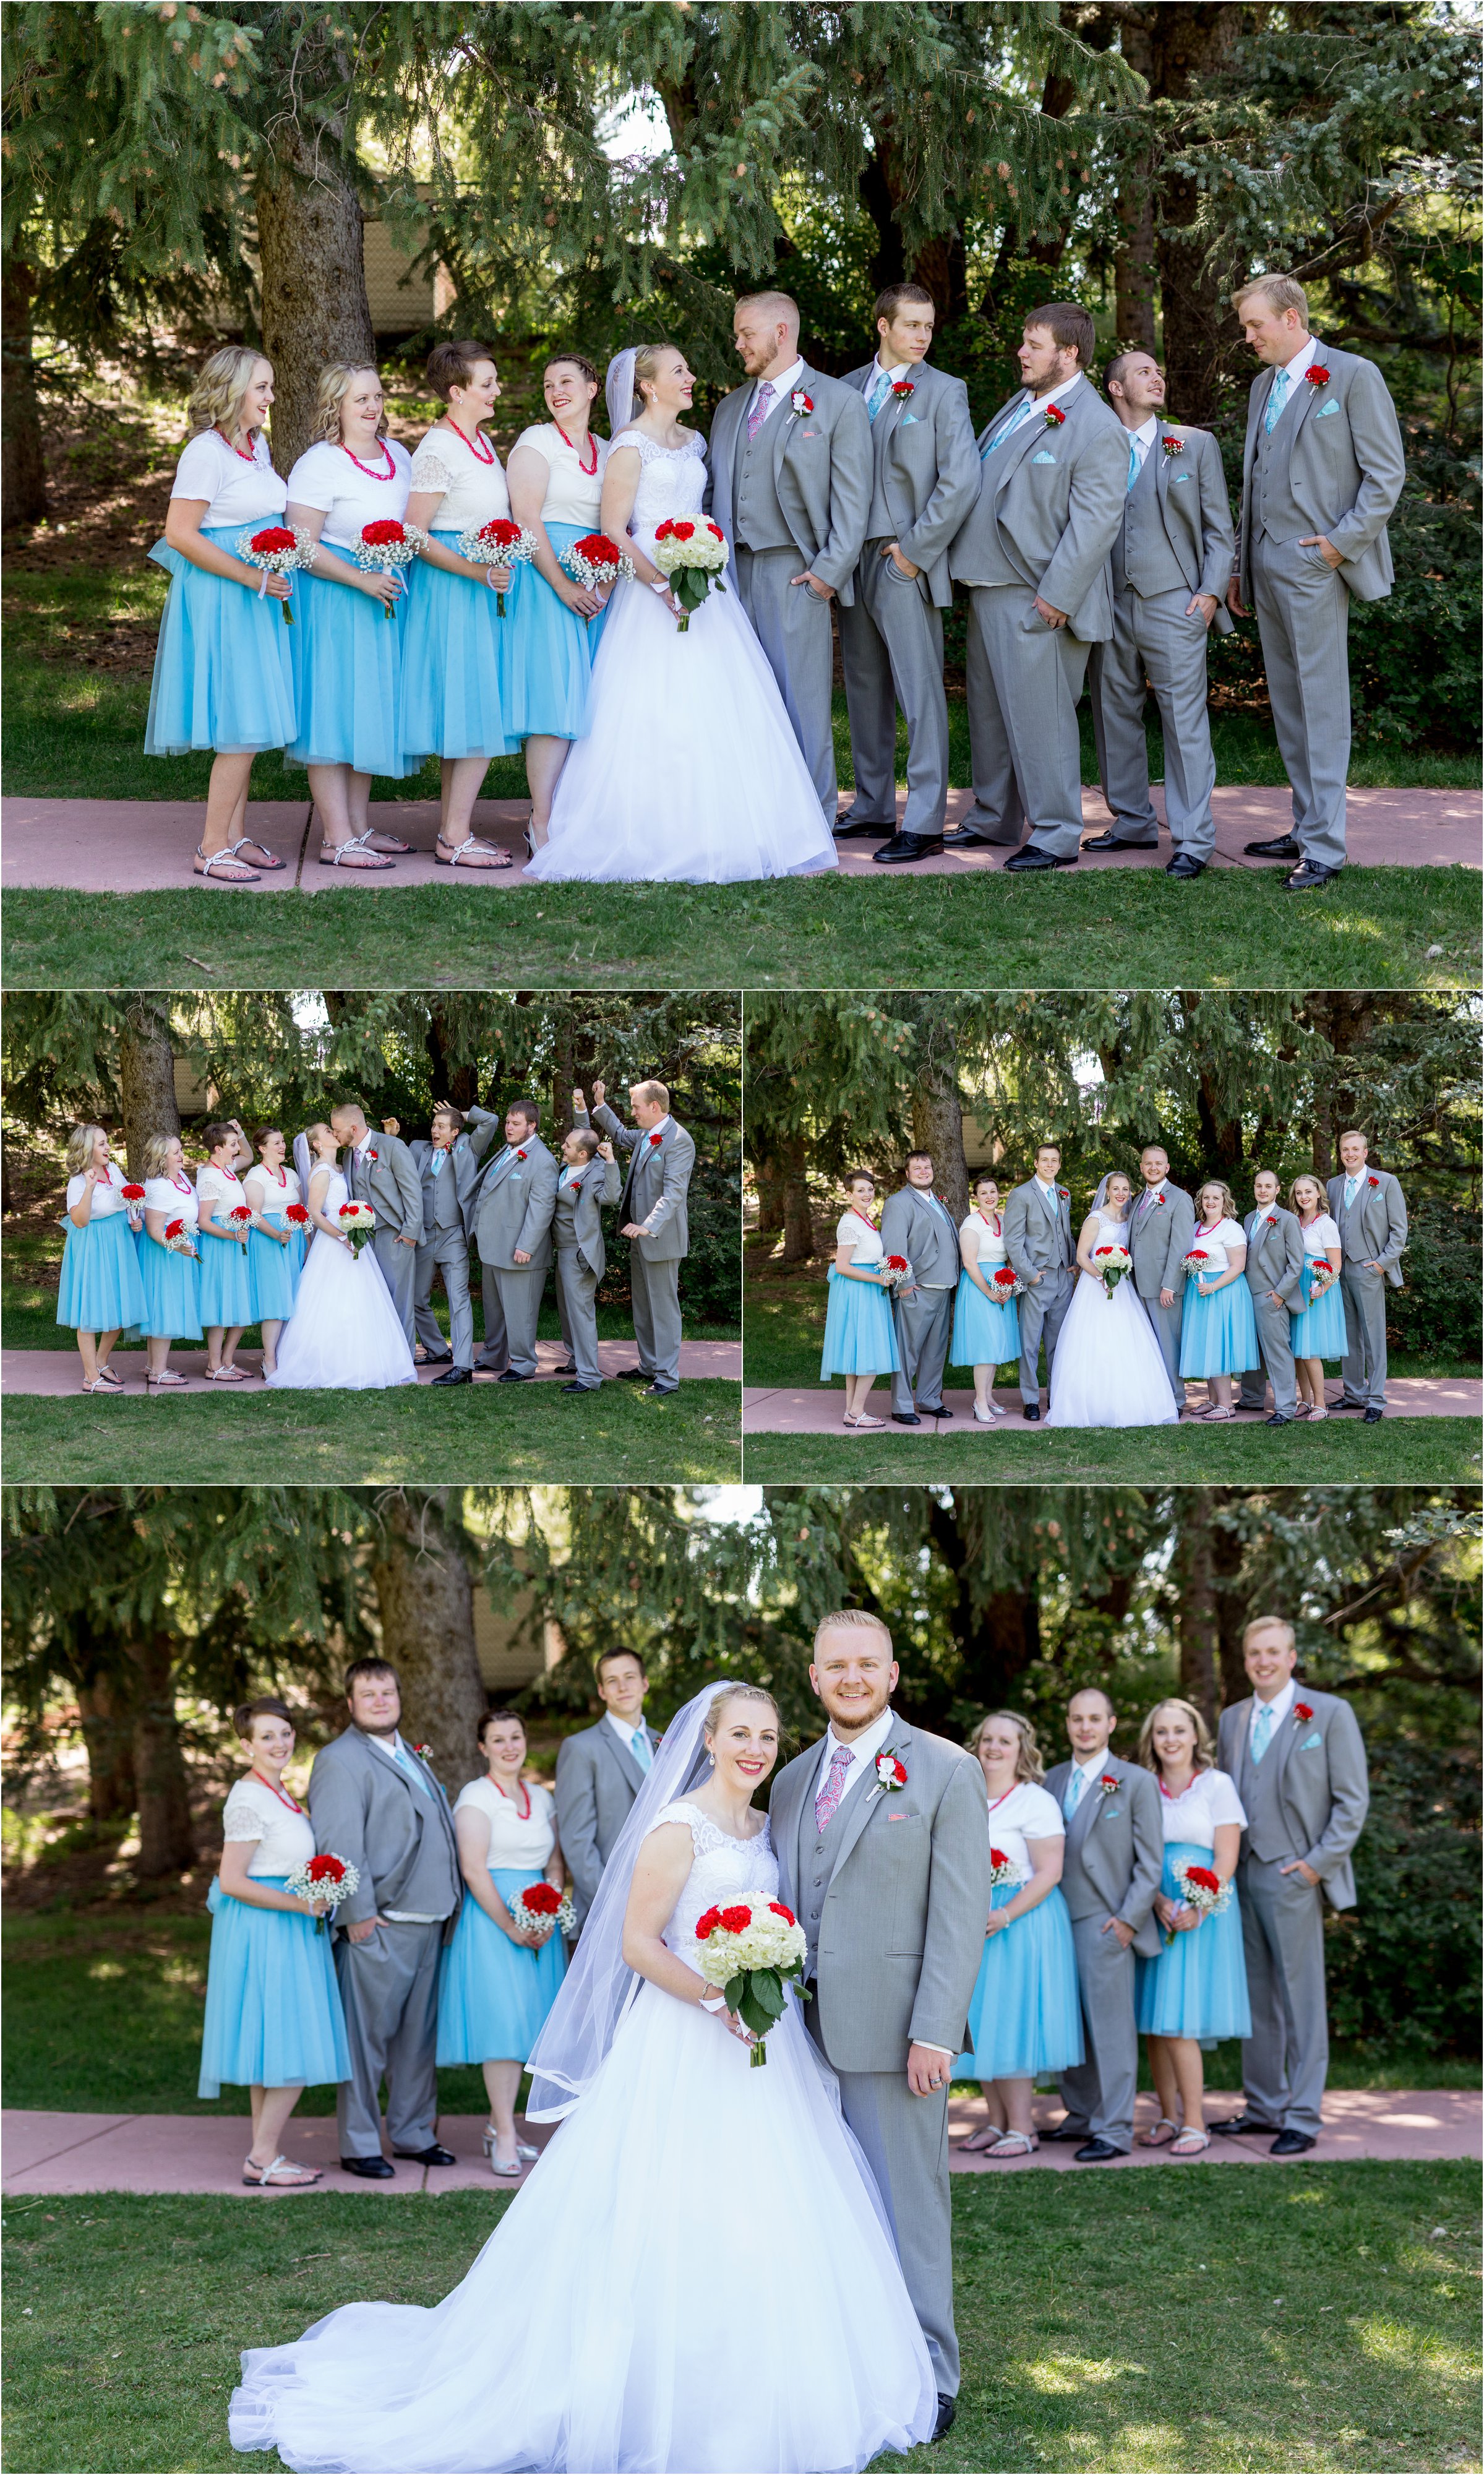 bridesmaids in blue and groomsmen in gray pose with bride and groom for a photo before their ceremony